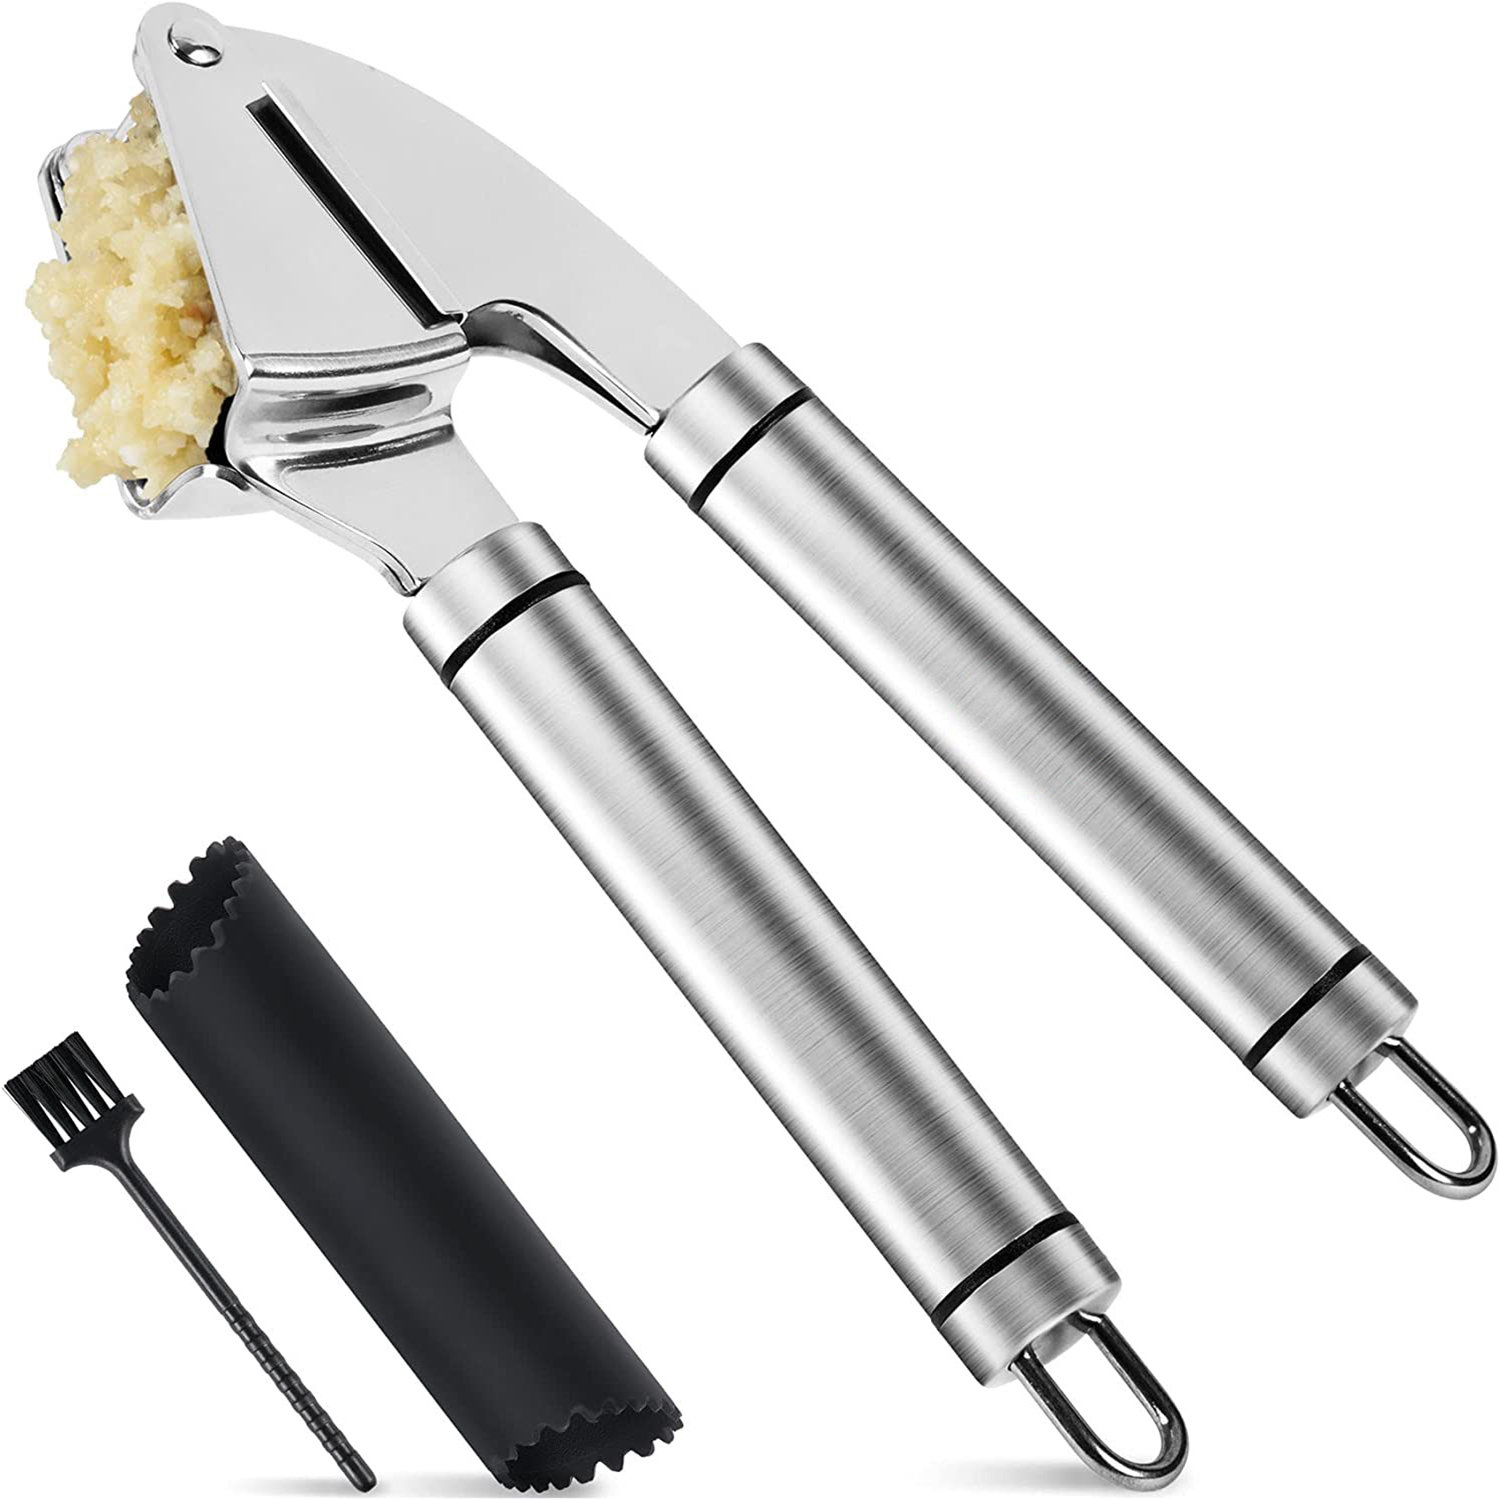 Bampredepos Garlic Press Stainless Steel Mincer And Crusher With Silicone  Roller Peeler. Rust Proof, Easy Squeeze, Dishwasher Safe, Easy Clean